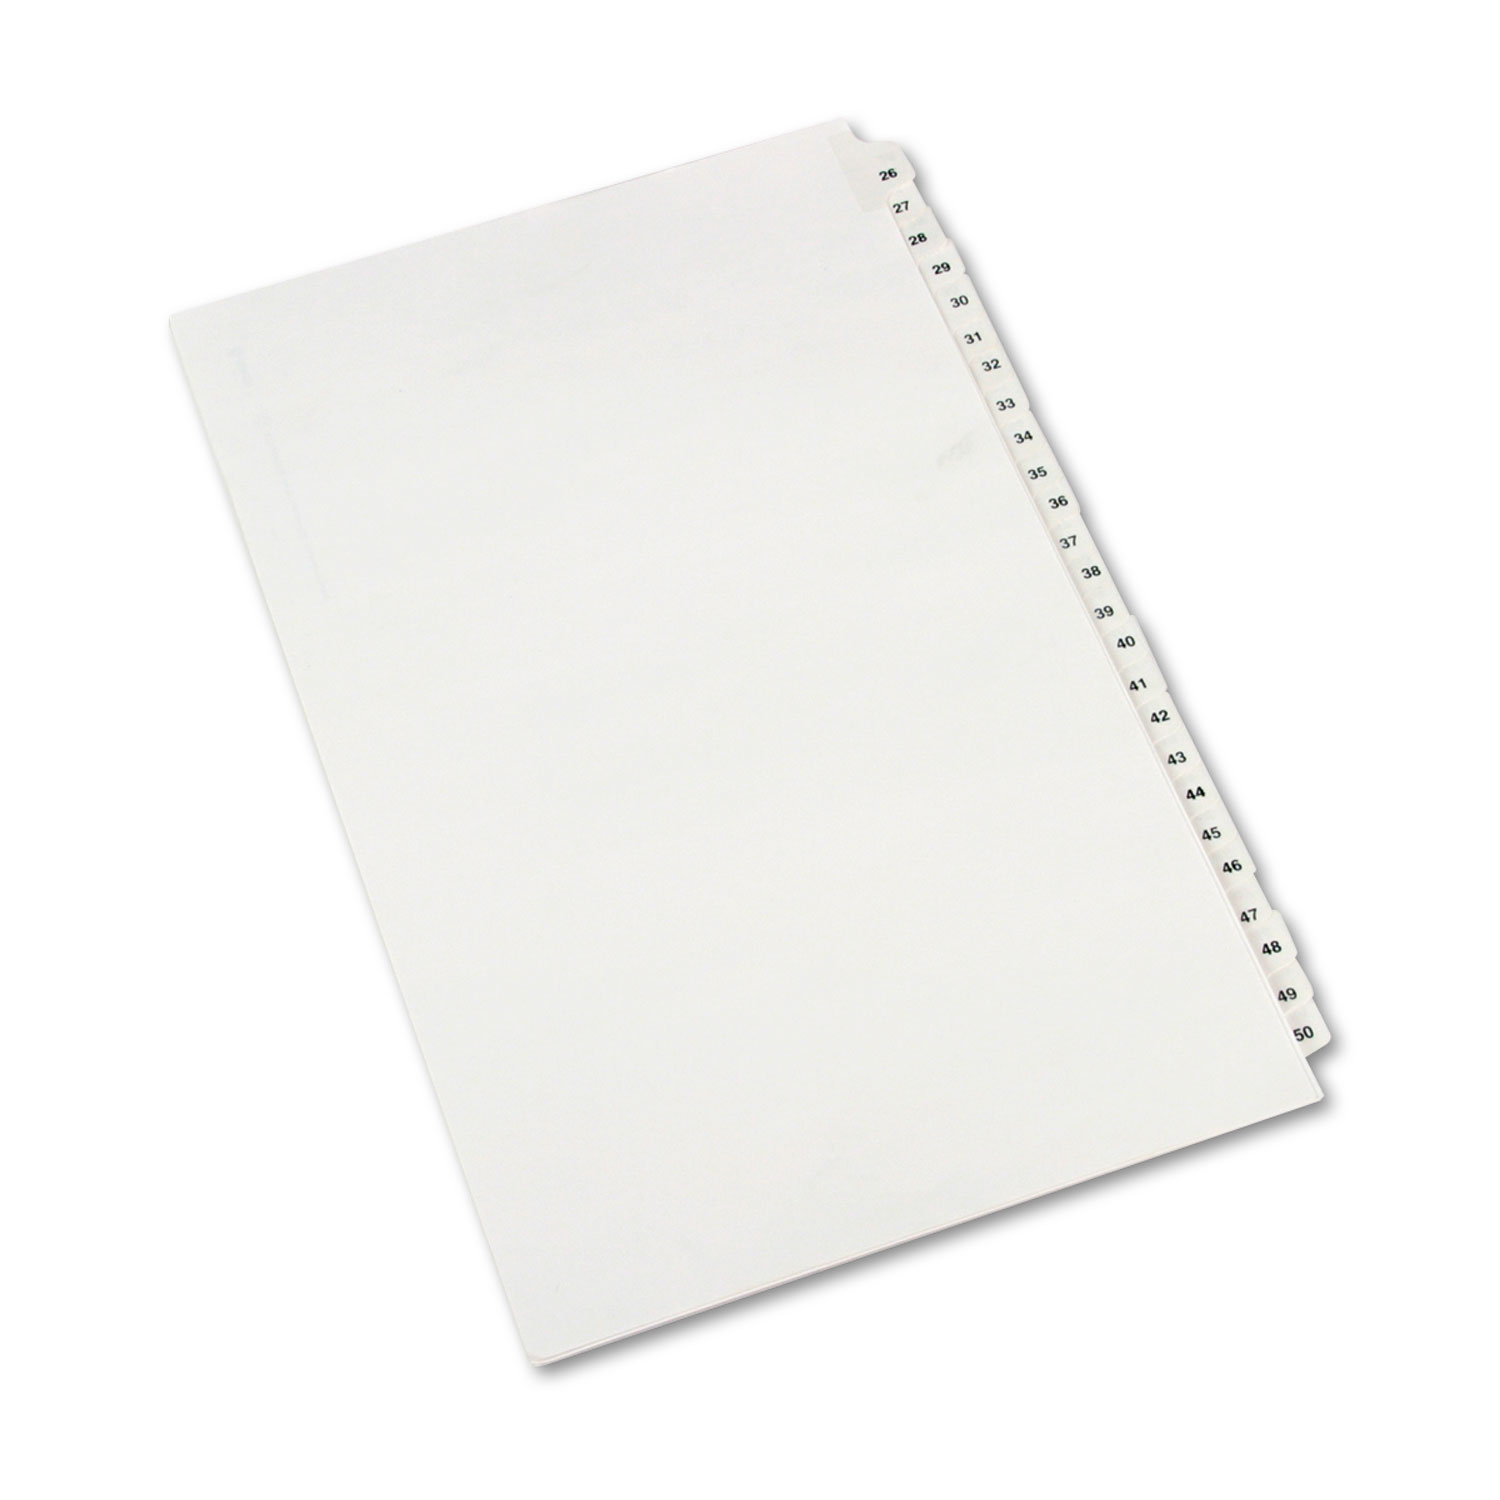 Avery-Style Legal Exhibit Side Tab Divider, Title: 26-50, 14 x 8 1/2, White